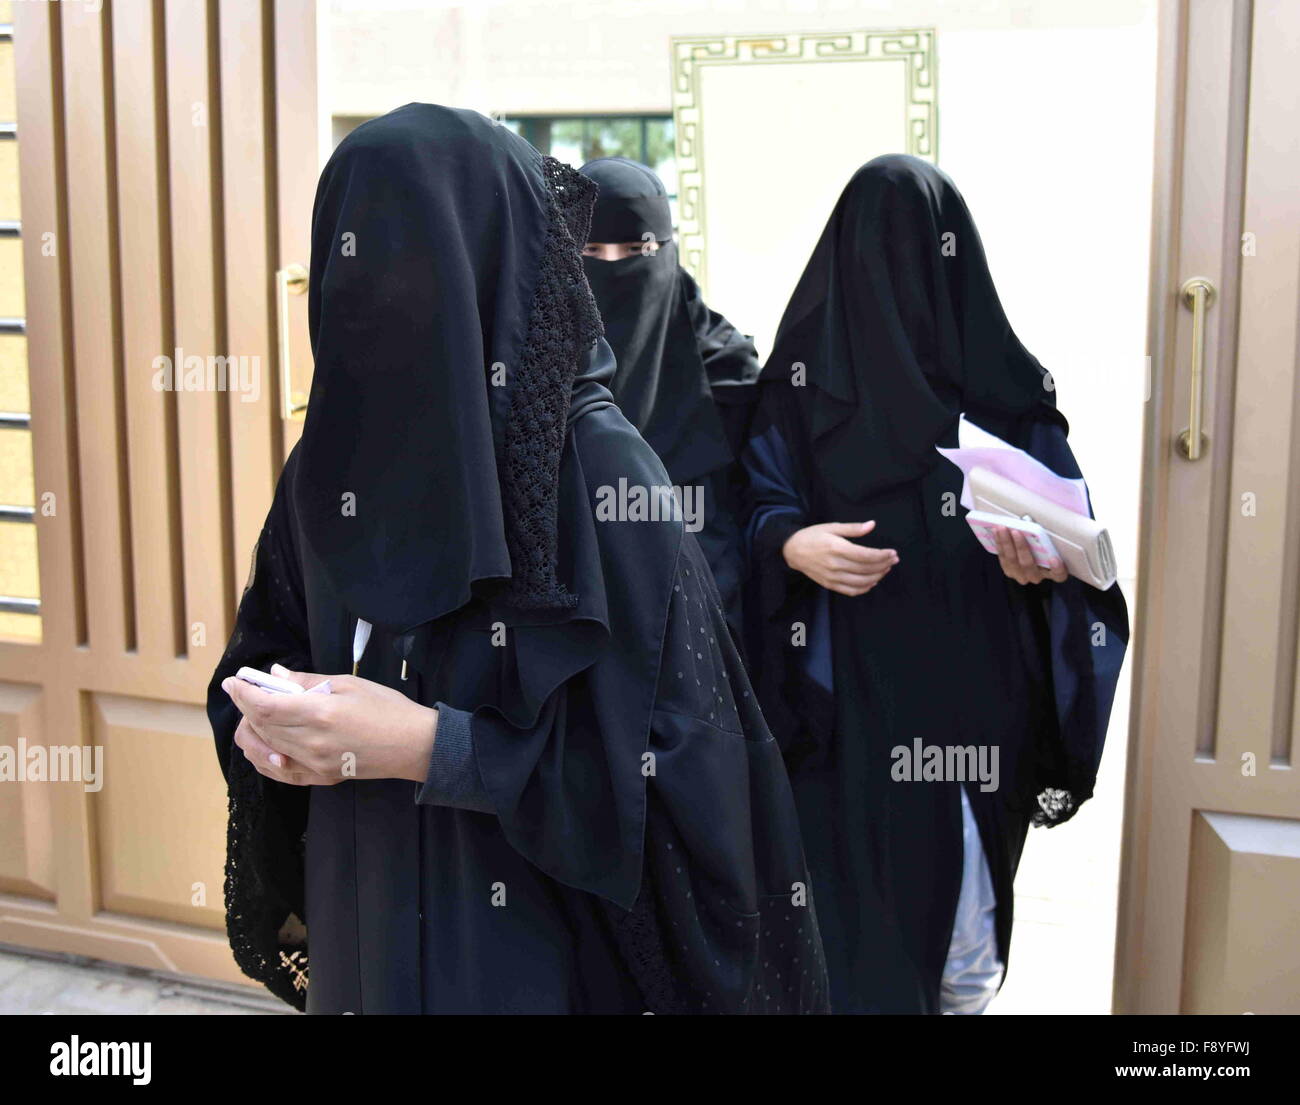 Riyadh, Saudi Arabia. 12th December, 2015. Women walk out of a polling station after casting their votes for municipal elections in Riyadh, Saudi Arabia, Dec. 12, 2015. More than 1.4 million people are eligible to vote, including 130,637 females who will be allowed to contest and cast ballots in the third municipal poll. It is Saudi Arabia's first elections open to women. (Xinhua/Wang Bo)(azp) Credit:  Xinhua/Alamy Live News Stock Photo